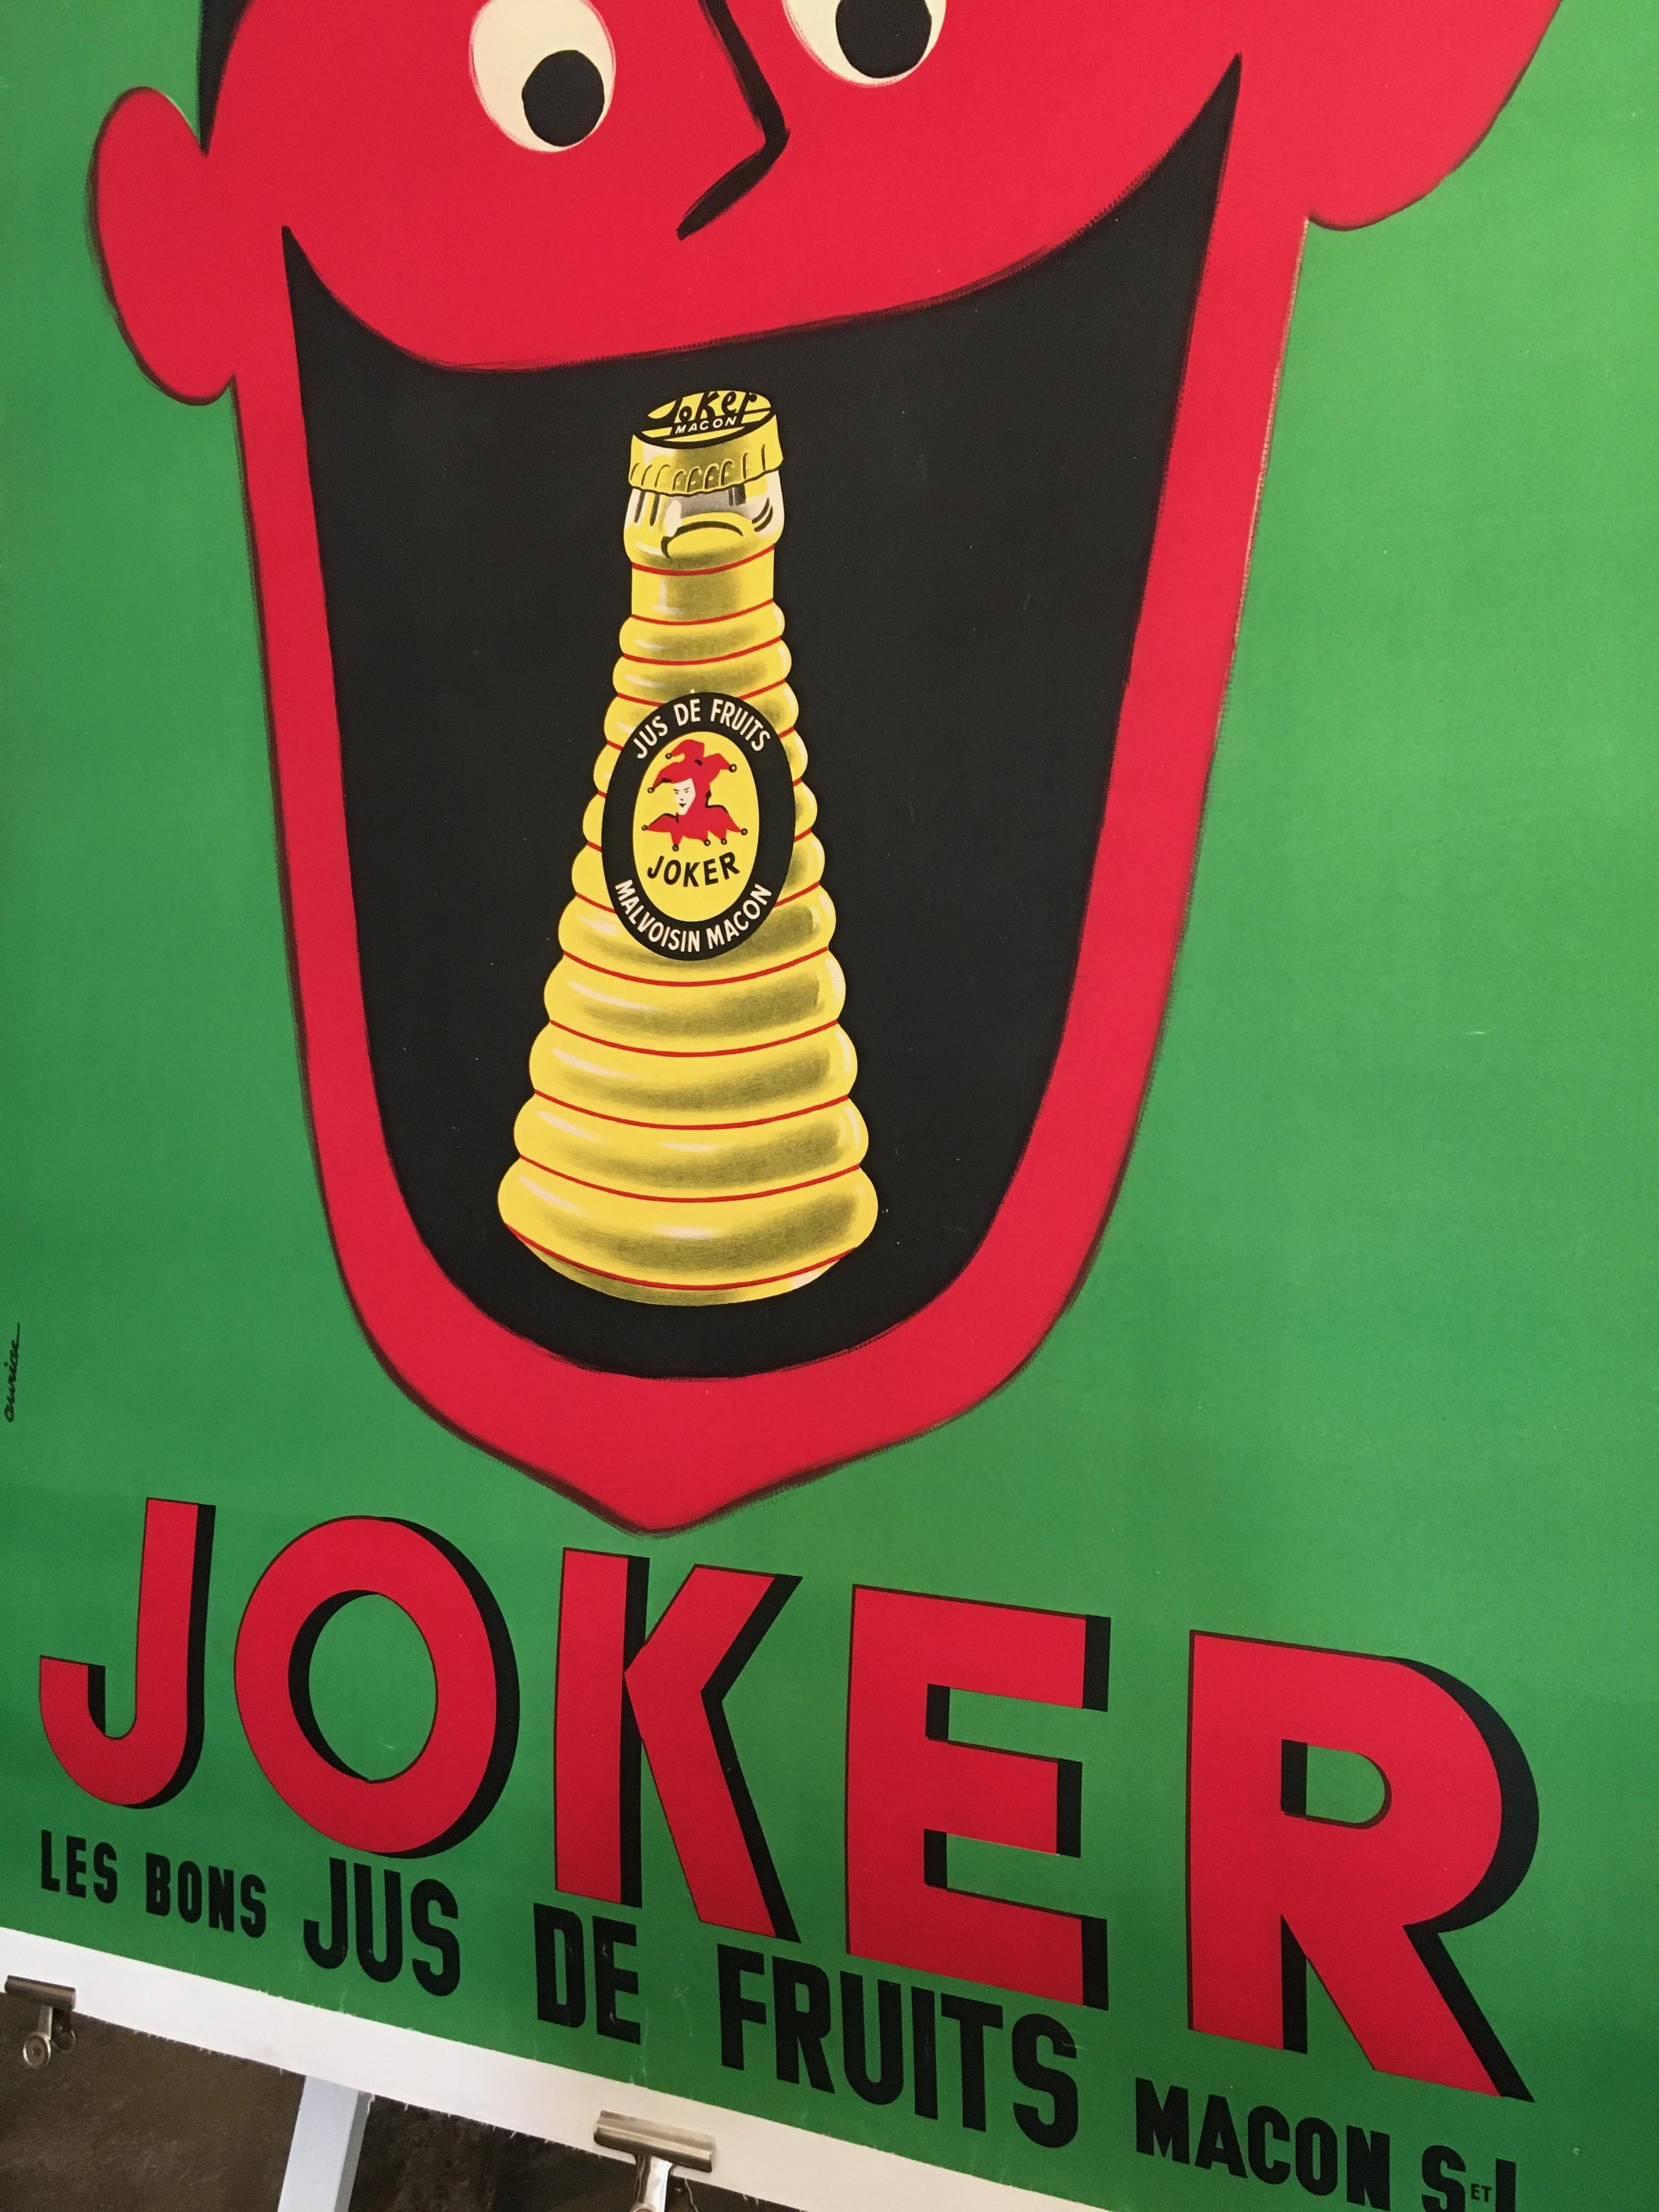 Midcentury rare French original vintage fruit-juice poster, 'Joker', 1957.

An original vintage poster advertising a fruit juice, this poster is rare as it was mainly printed with a blue background, the rare green background is now hard to come